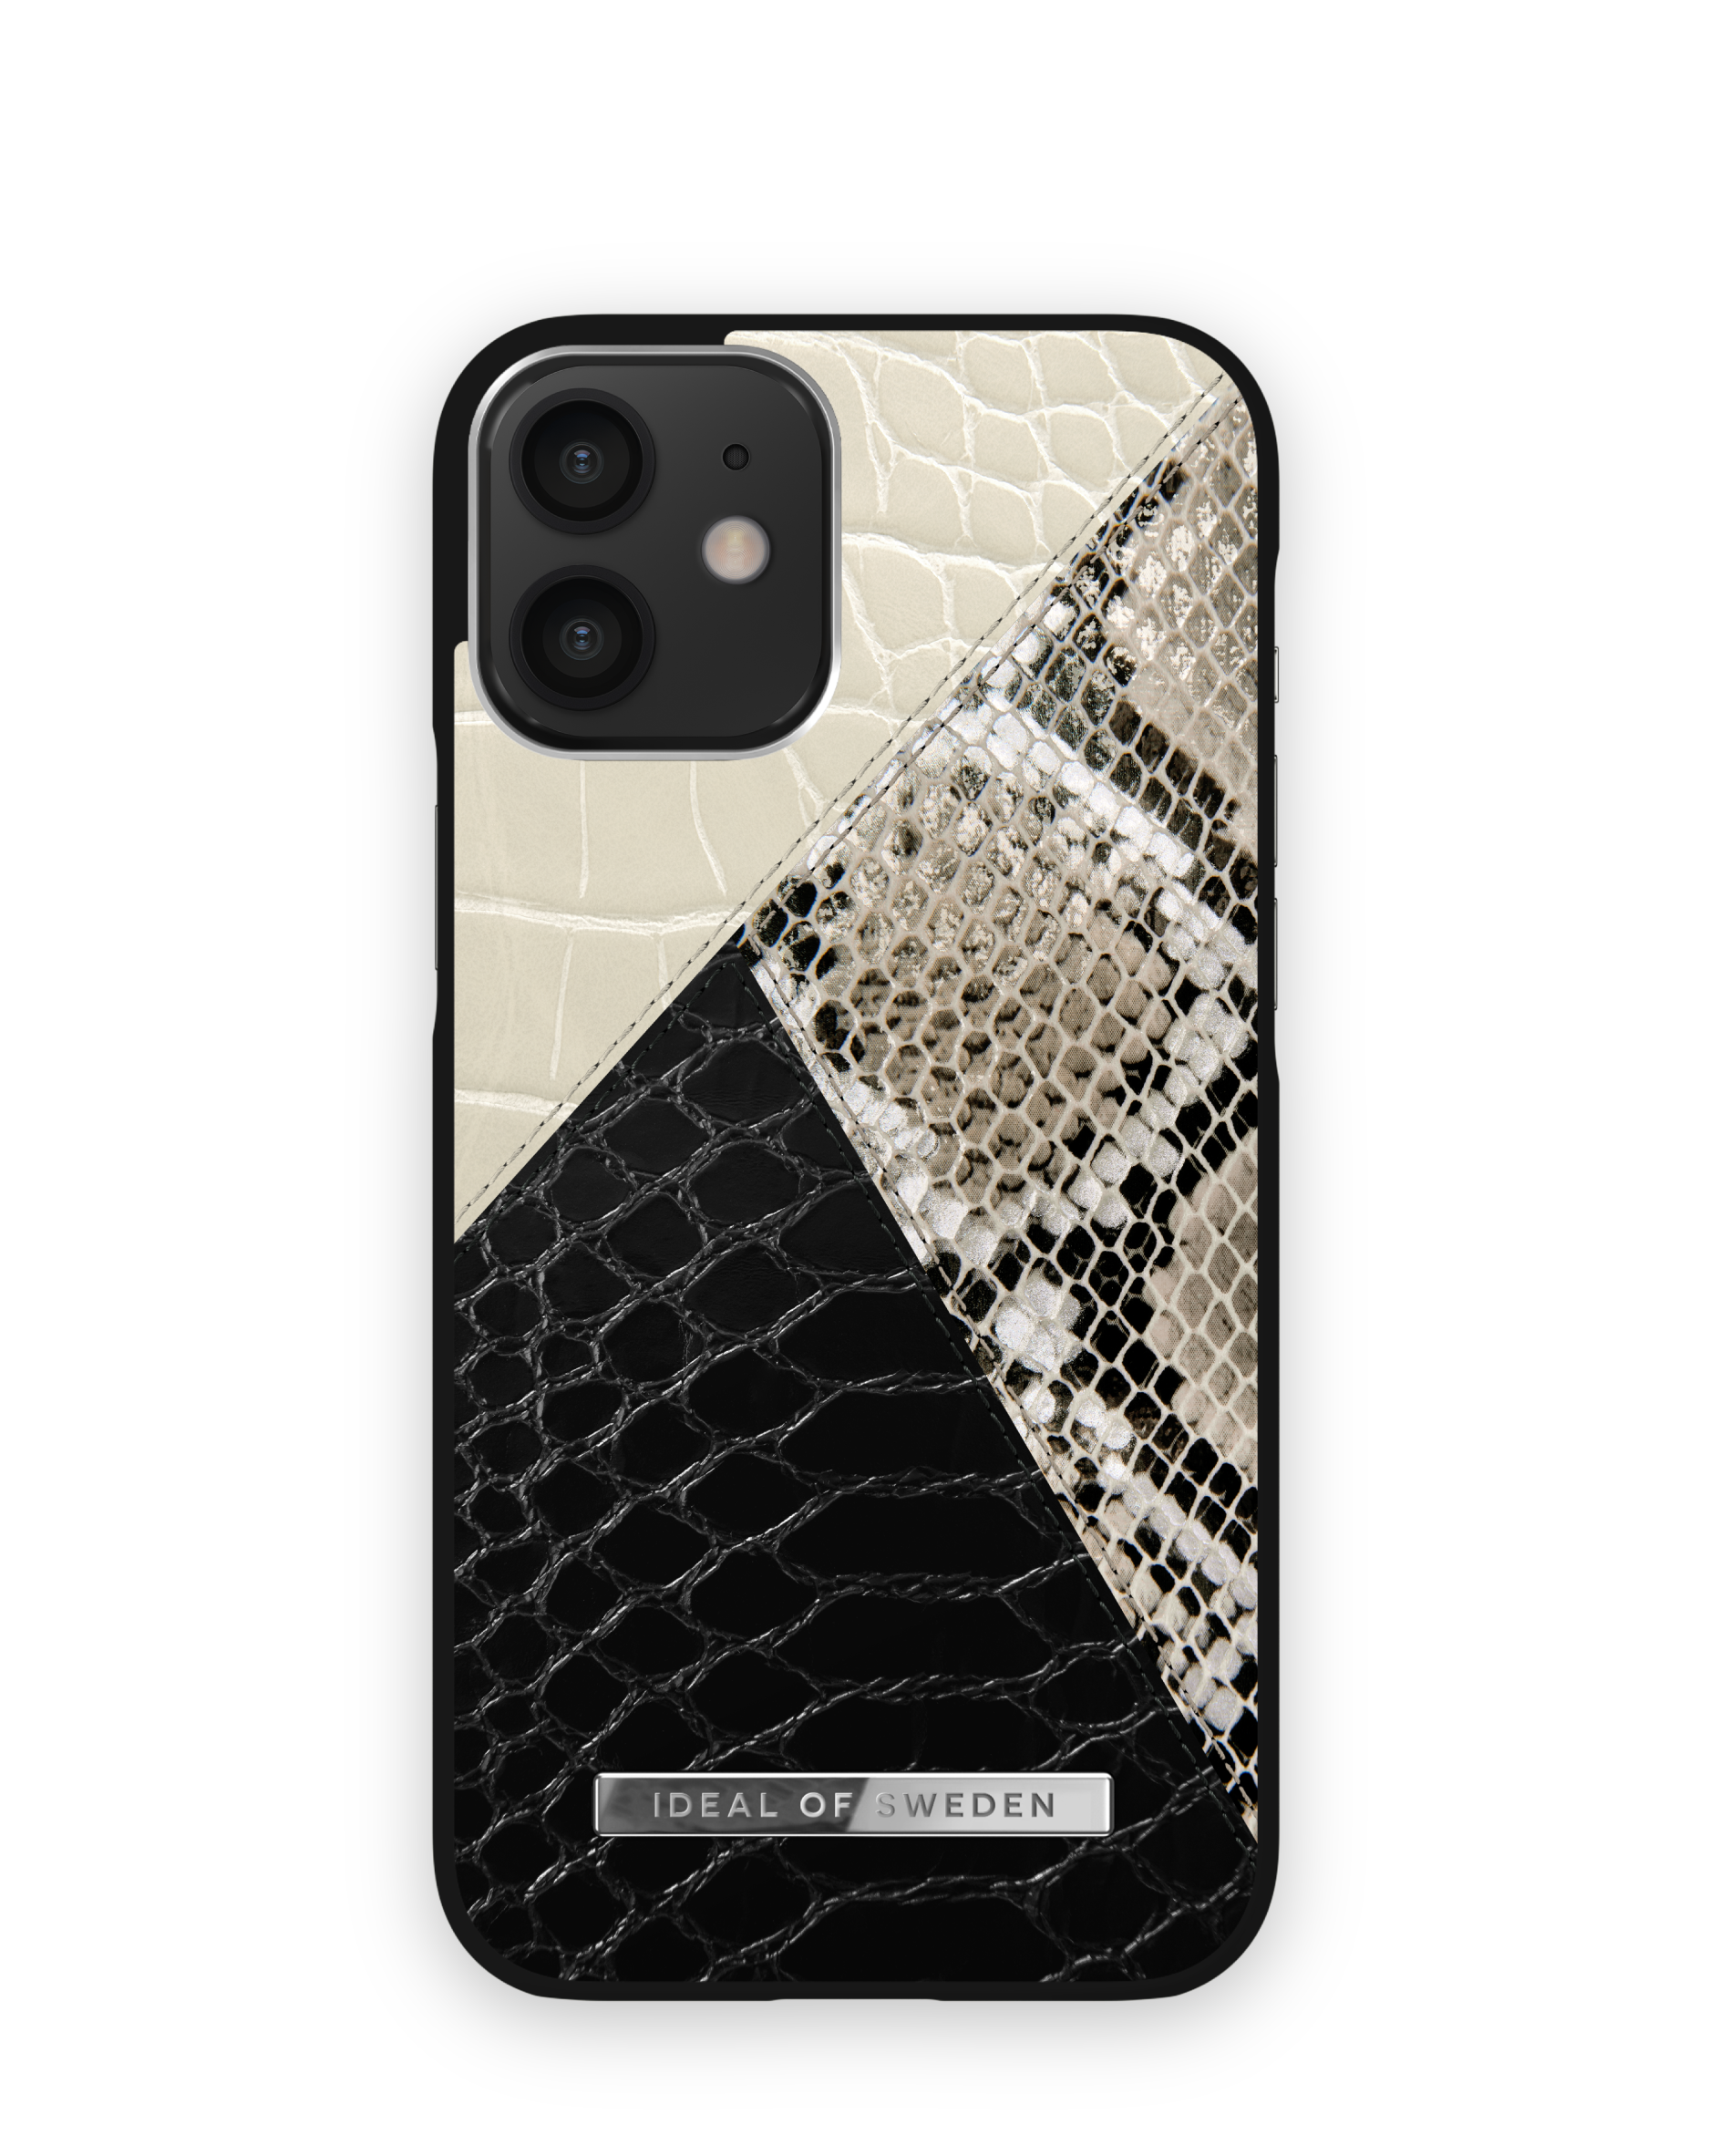 IDEAL 12 SWEDEN mini, Backcover, IDACSS21-I2054-271, OF IPhone Night Apple, Sky Snake